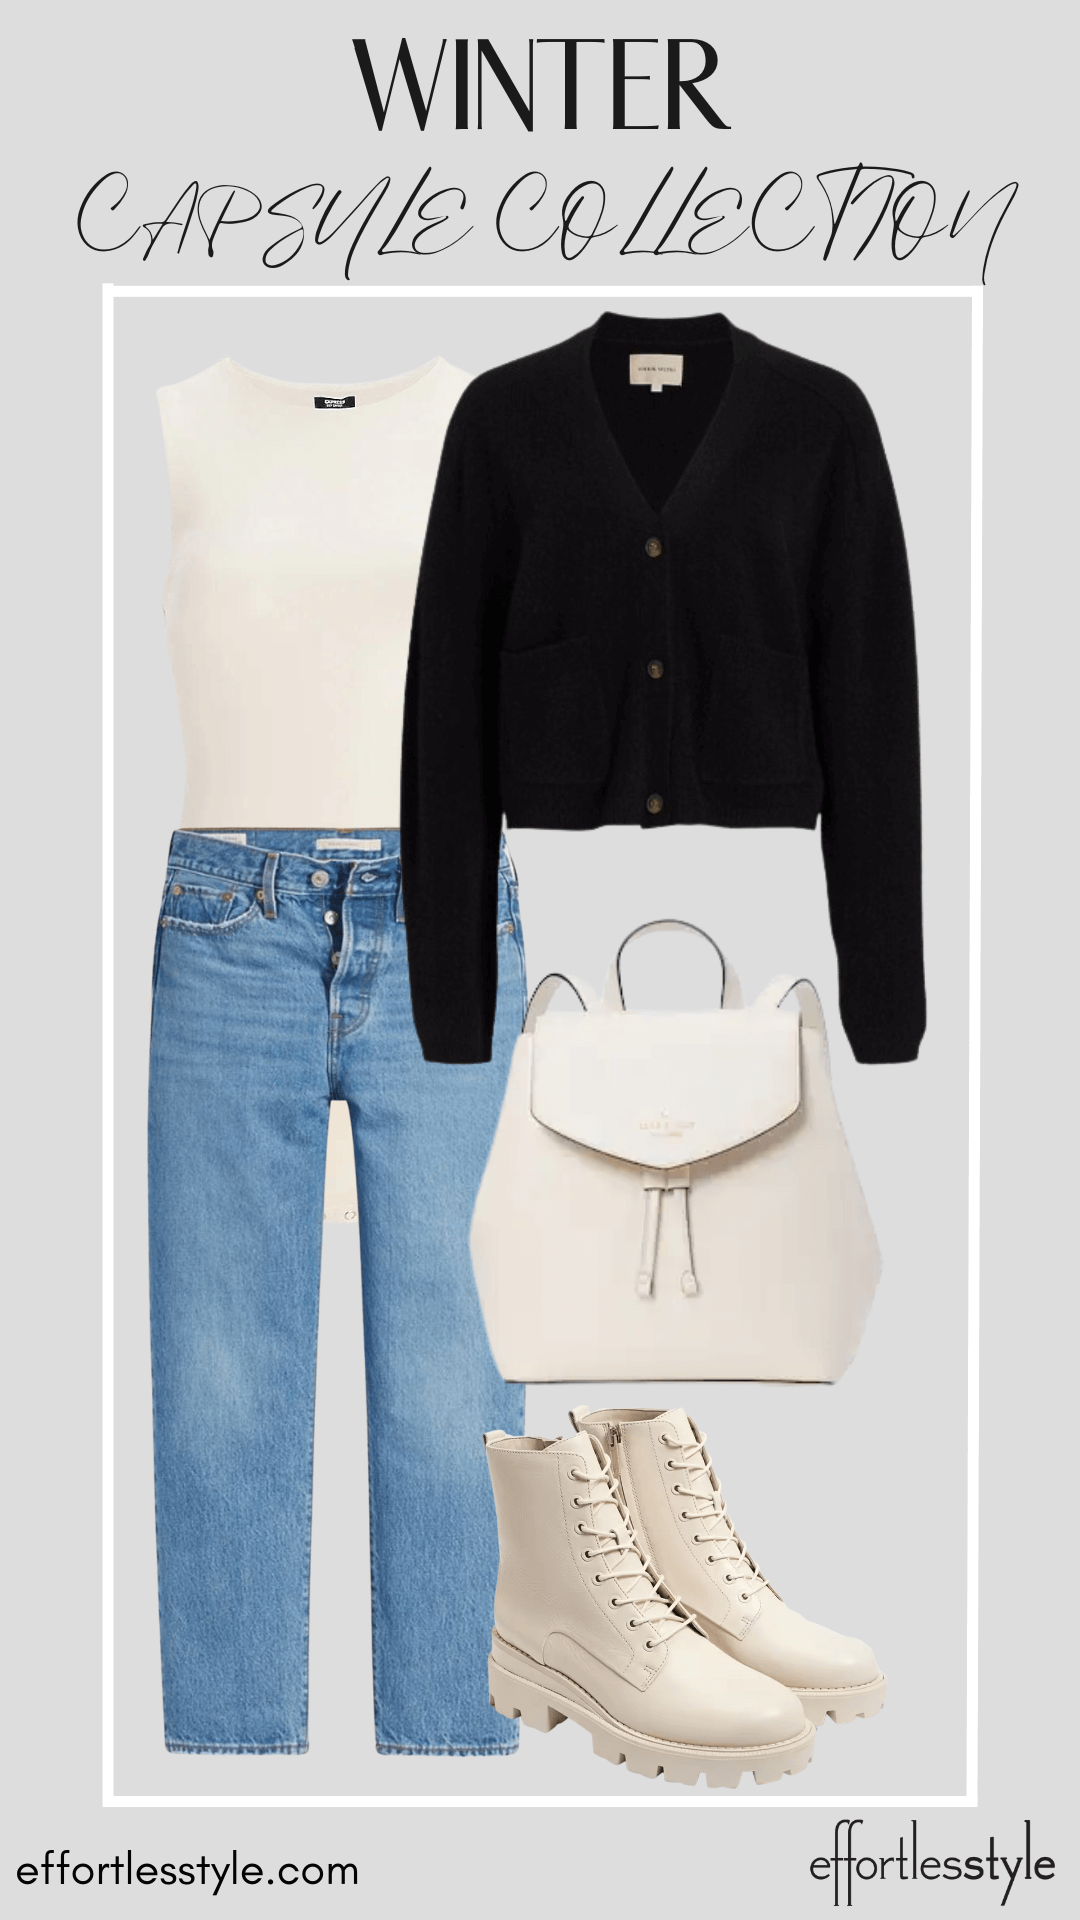 How To Wear Our Winter Capsule Wardrobe - Part 2 Cropped Cardigan & Faux Leather Bodysuit & Dark Wash Jeans how to style a faux leather bodysuit ways to wear a faux leather bodysuit how to wear a cropped cardigan with jeans how to style a cropped cardigan with combat boots leather backpack